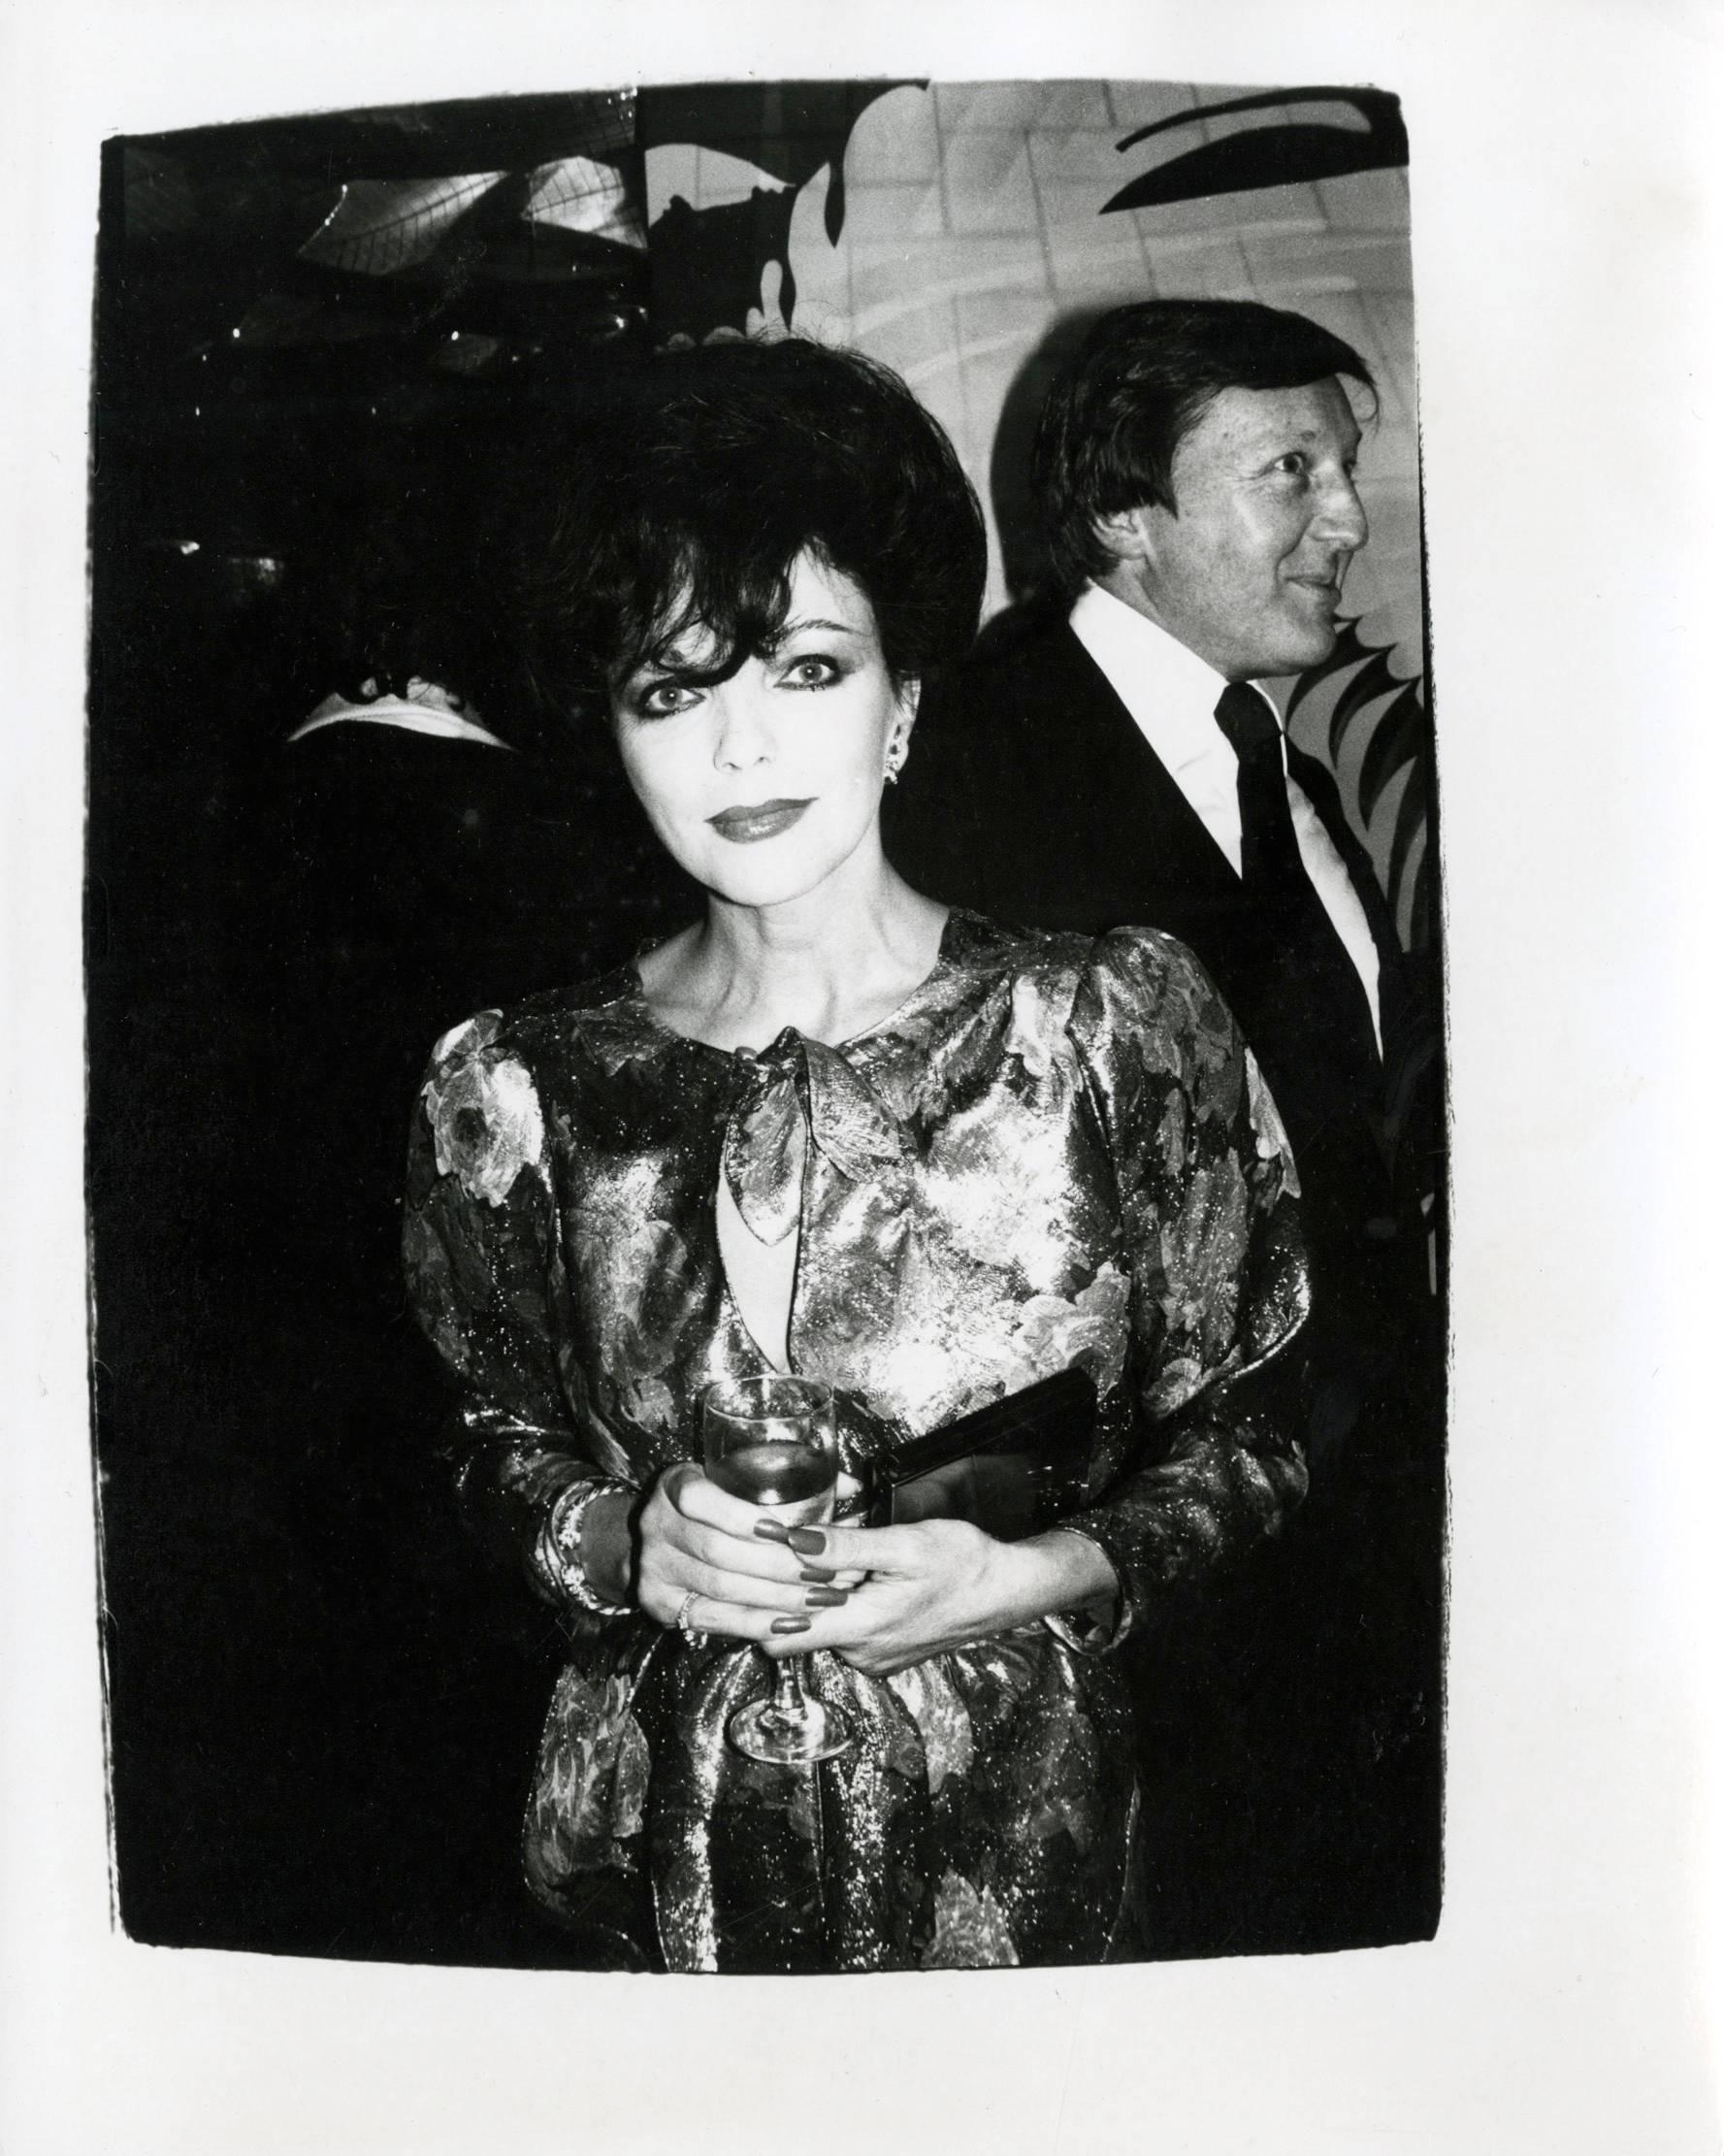 Andy Warhol Portrait Photograph - Joan Collins at The Factory